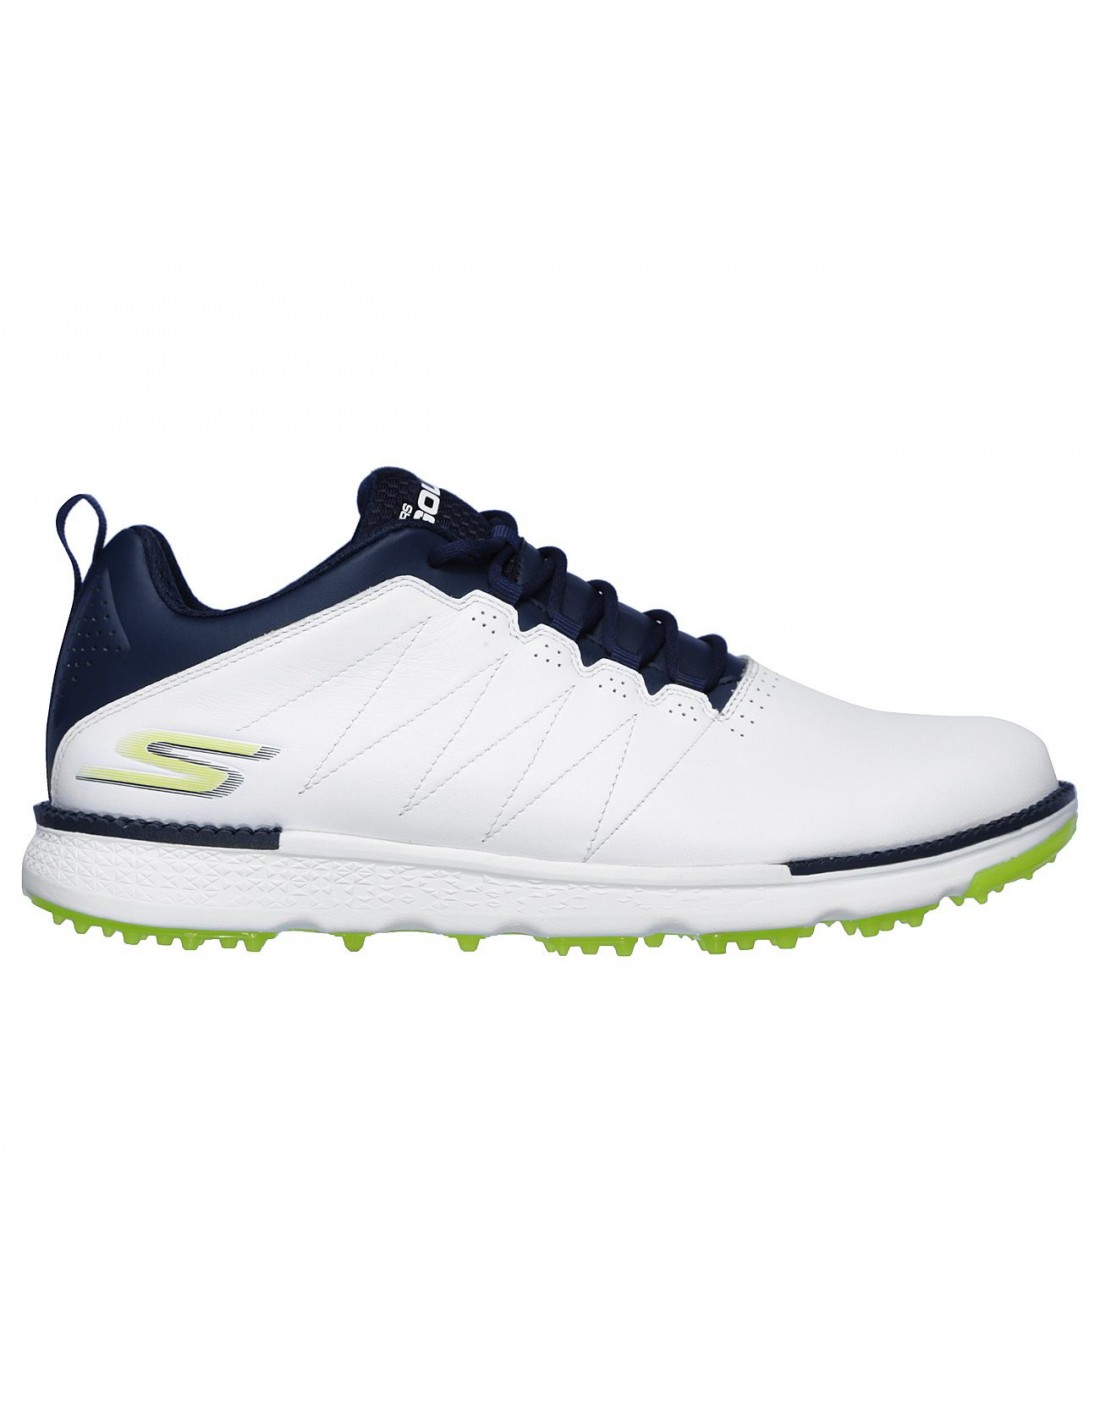 skechers on the go deco trainers mens